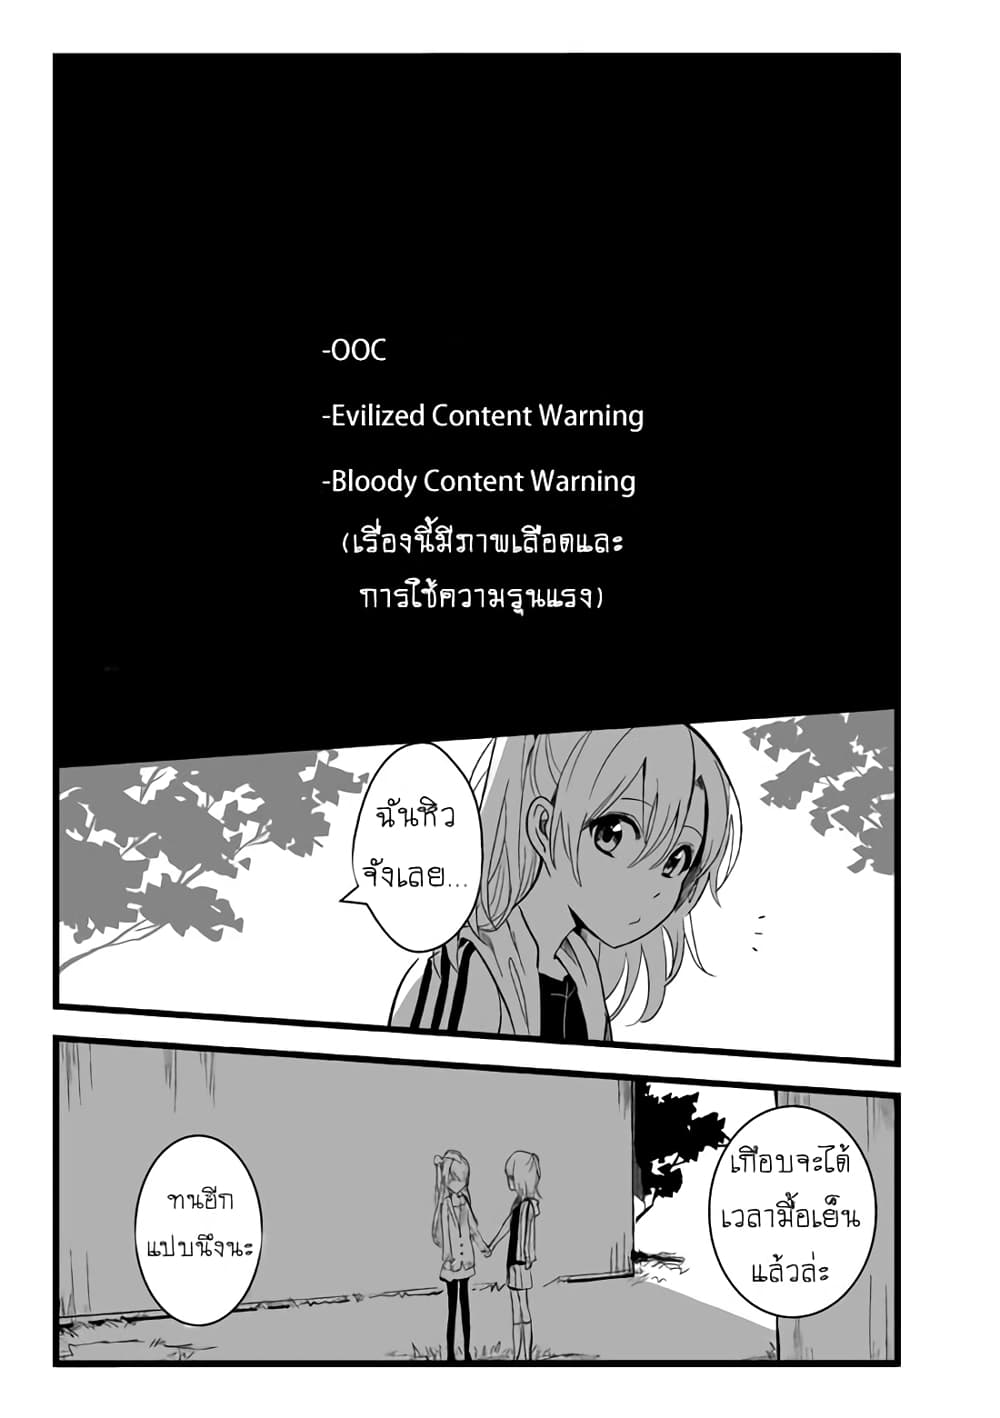 AU Lovelive! x Tokyo Ghoul - Ghoul Catching Girl 1-บทอุมิ